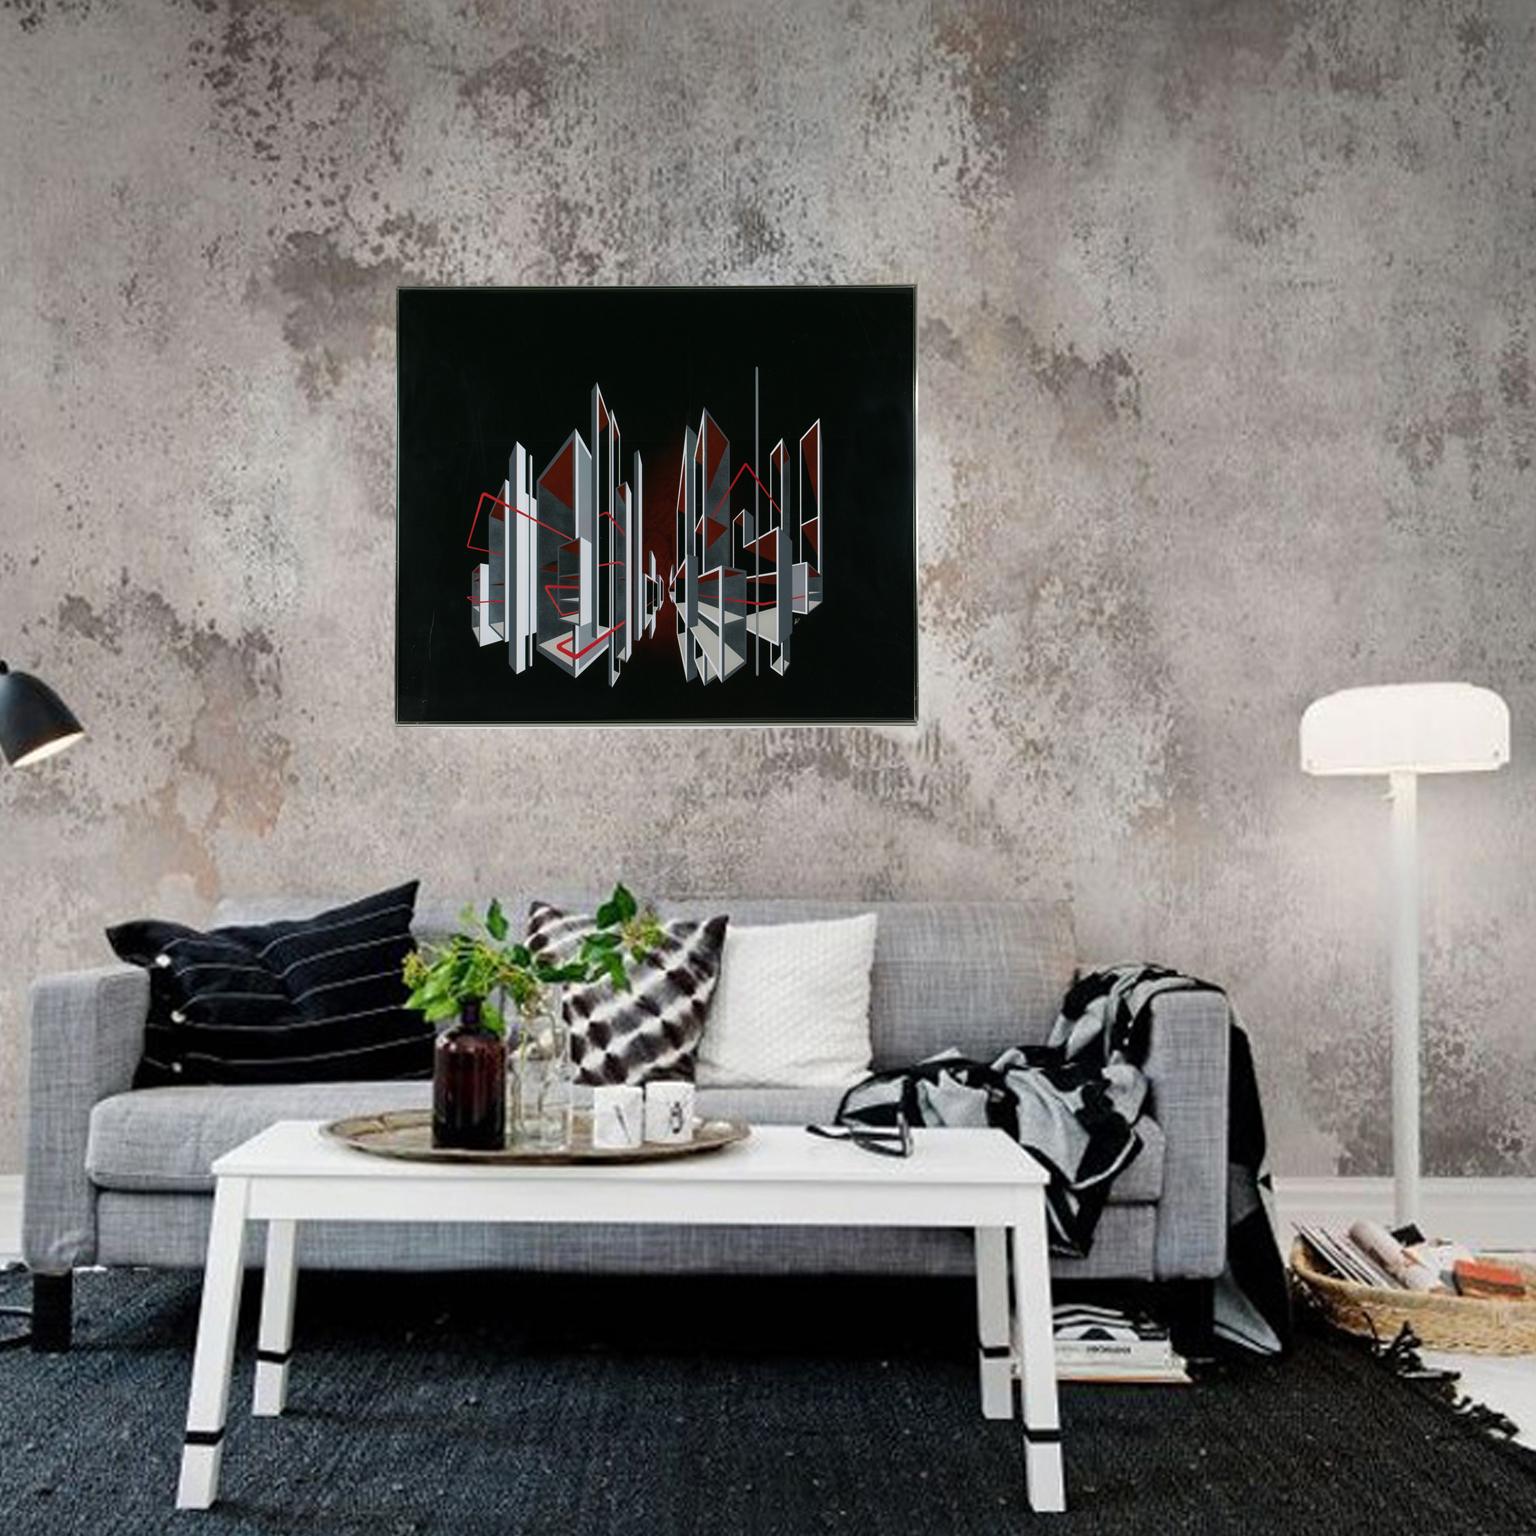 Cityscape Kinetic Optical Op Art Painting on Plexiglass by L.L. Long For Sale 2